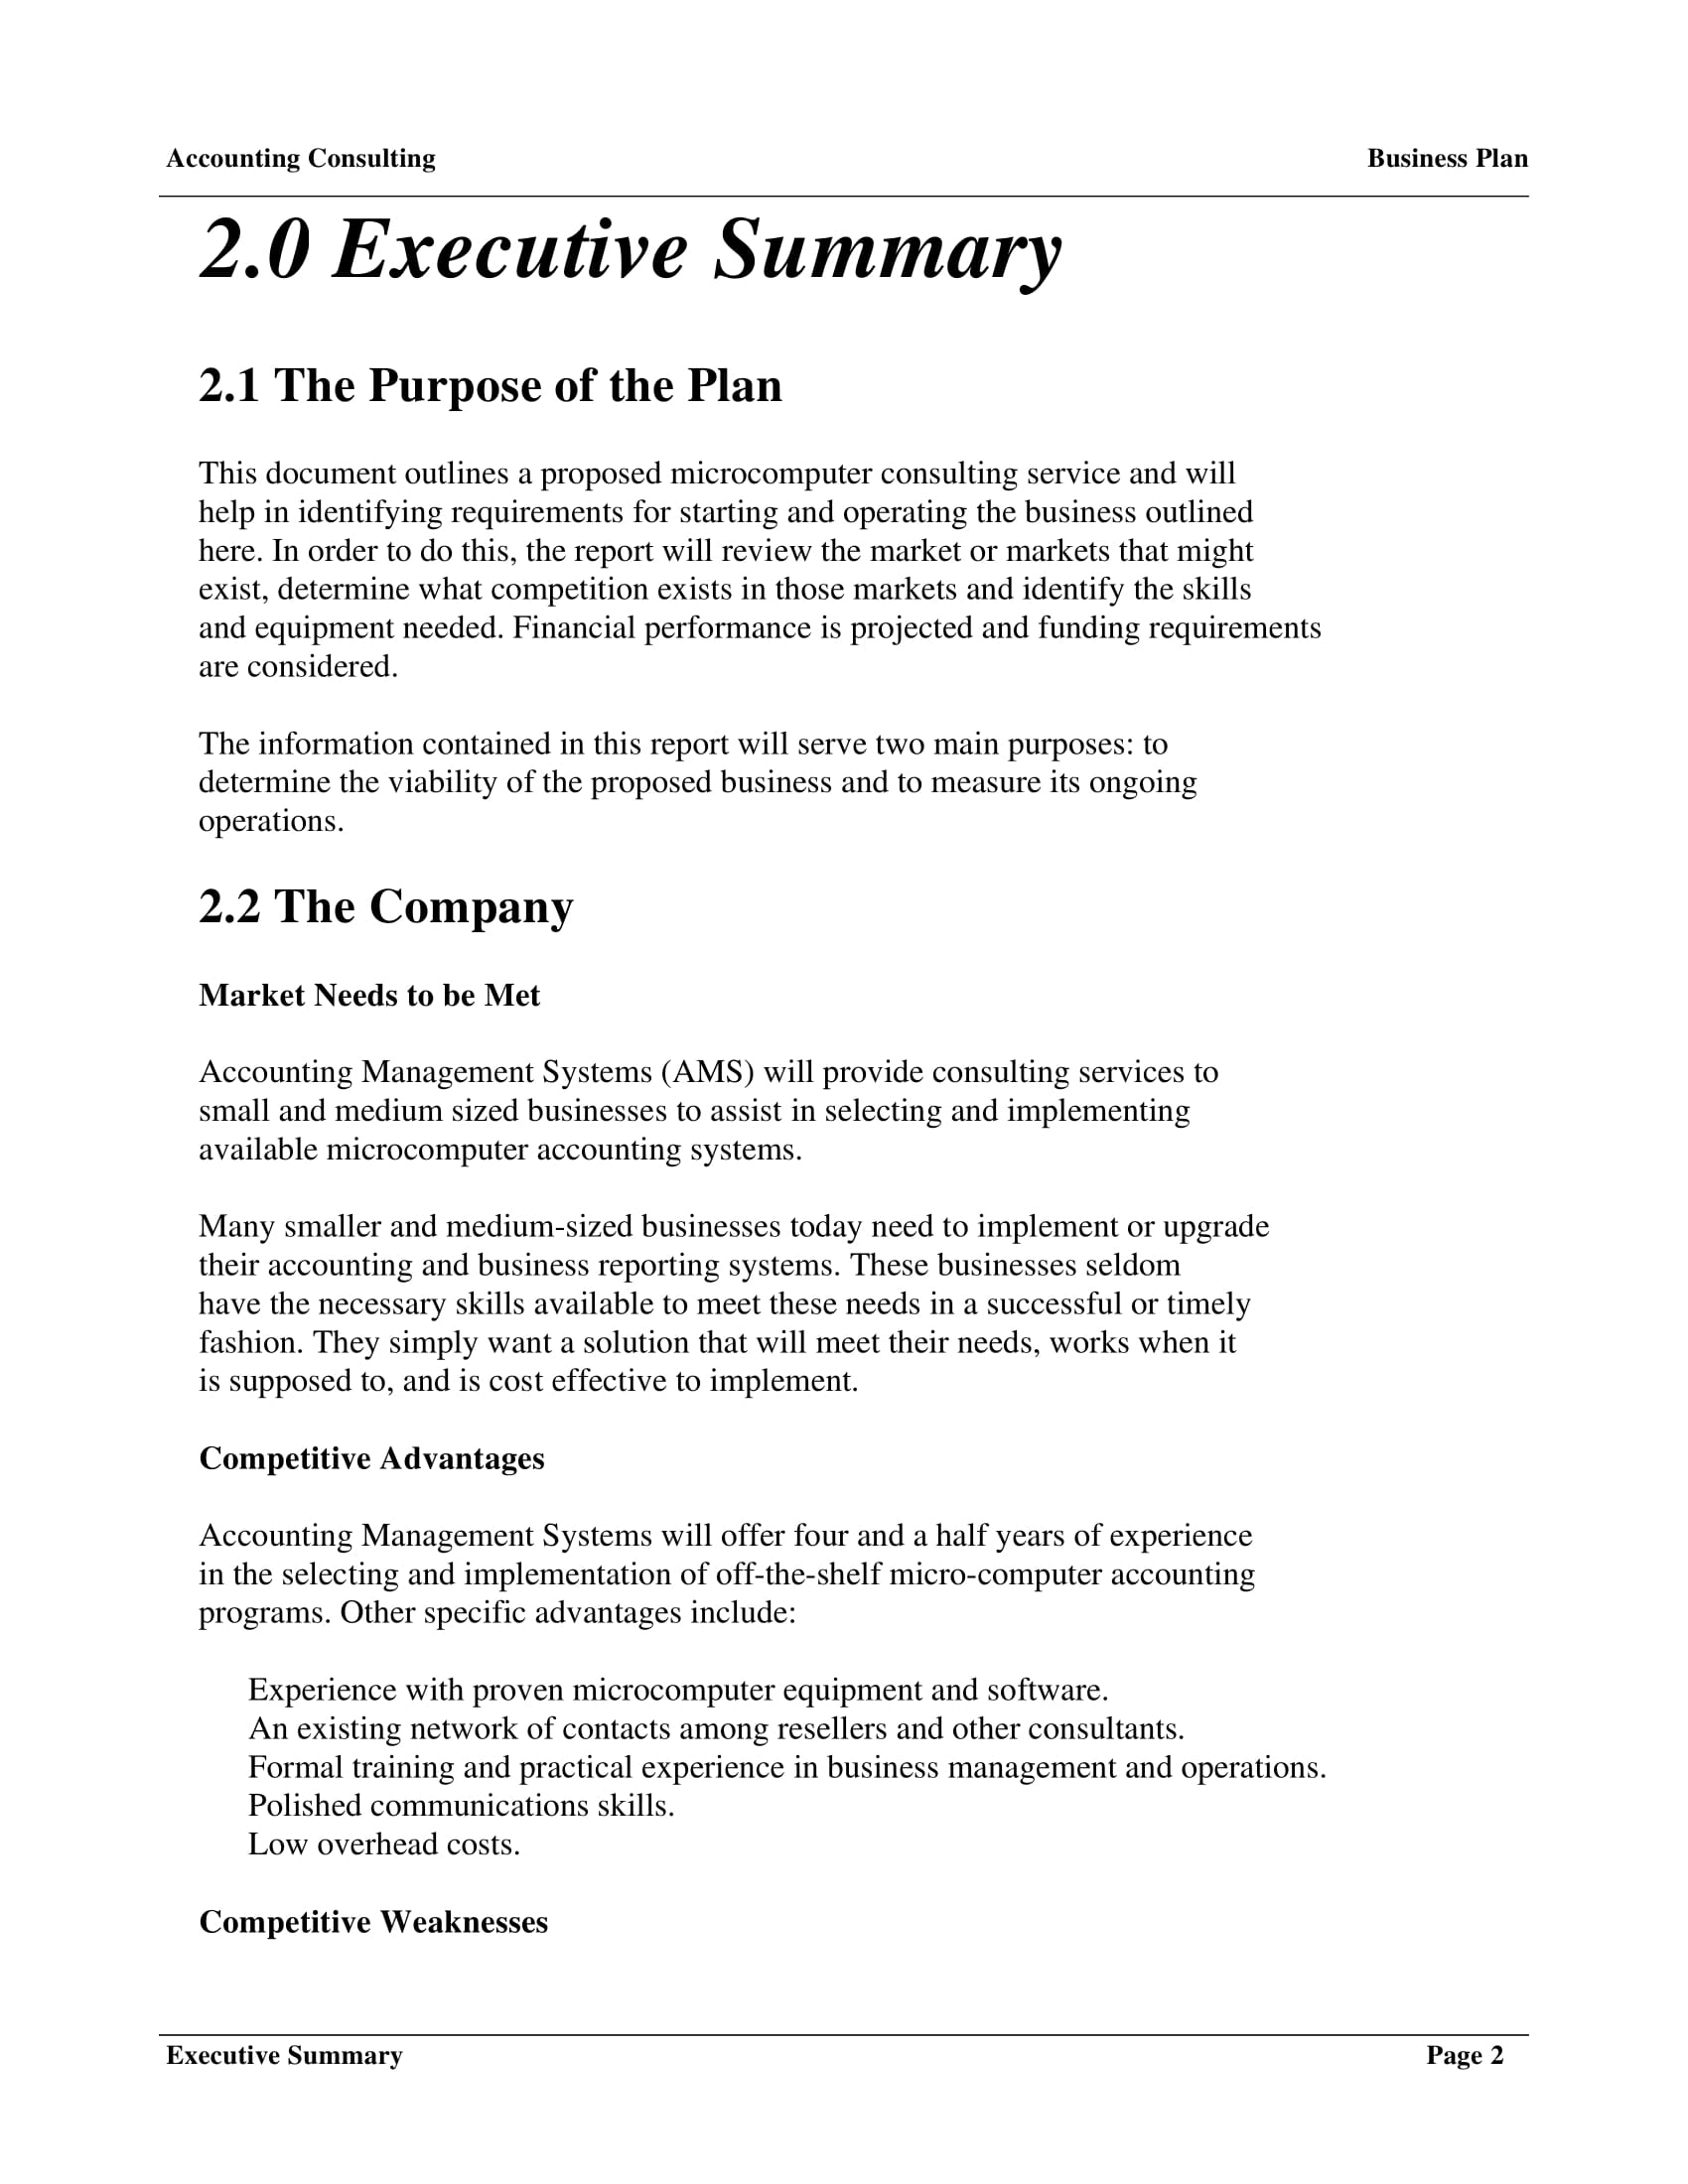 business accounting consulting business plan example